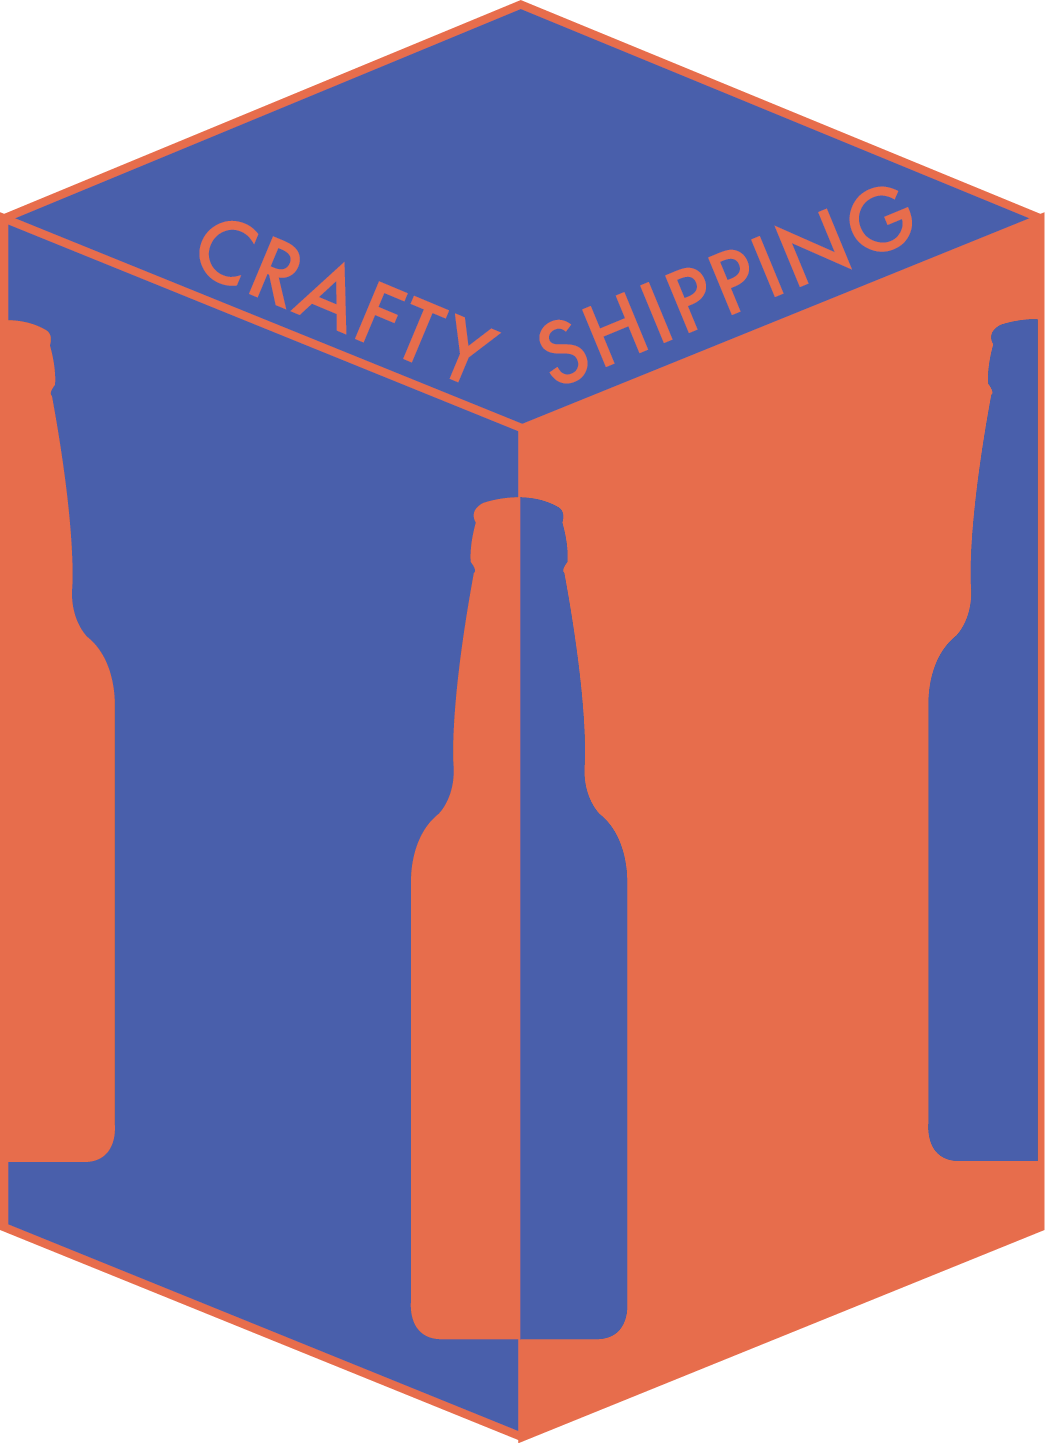 Crafty Shipping - Safely Ship Your Bottles!